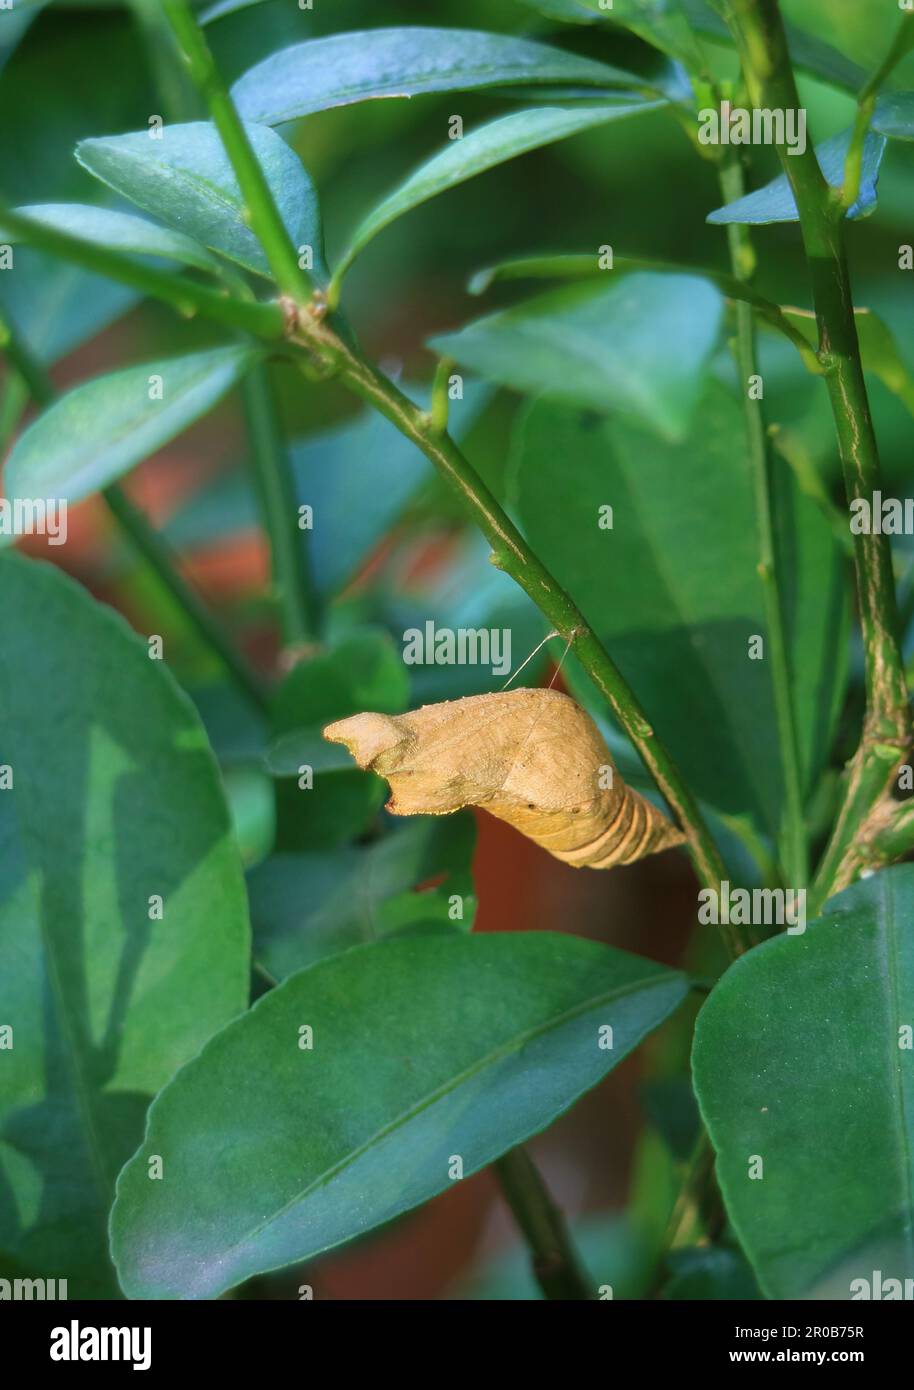 Closeup of a Lime Butterfly Pupa Suspended under the Branch of Lime Tree Stock Photo